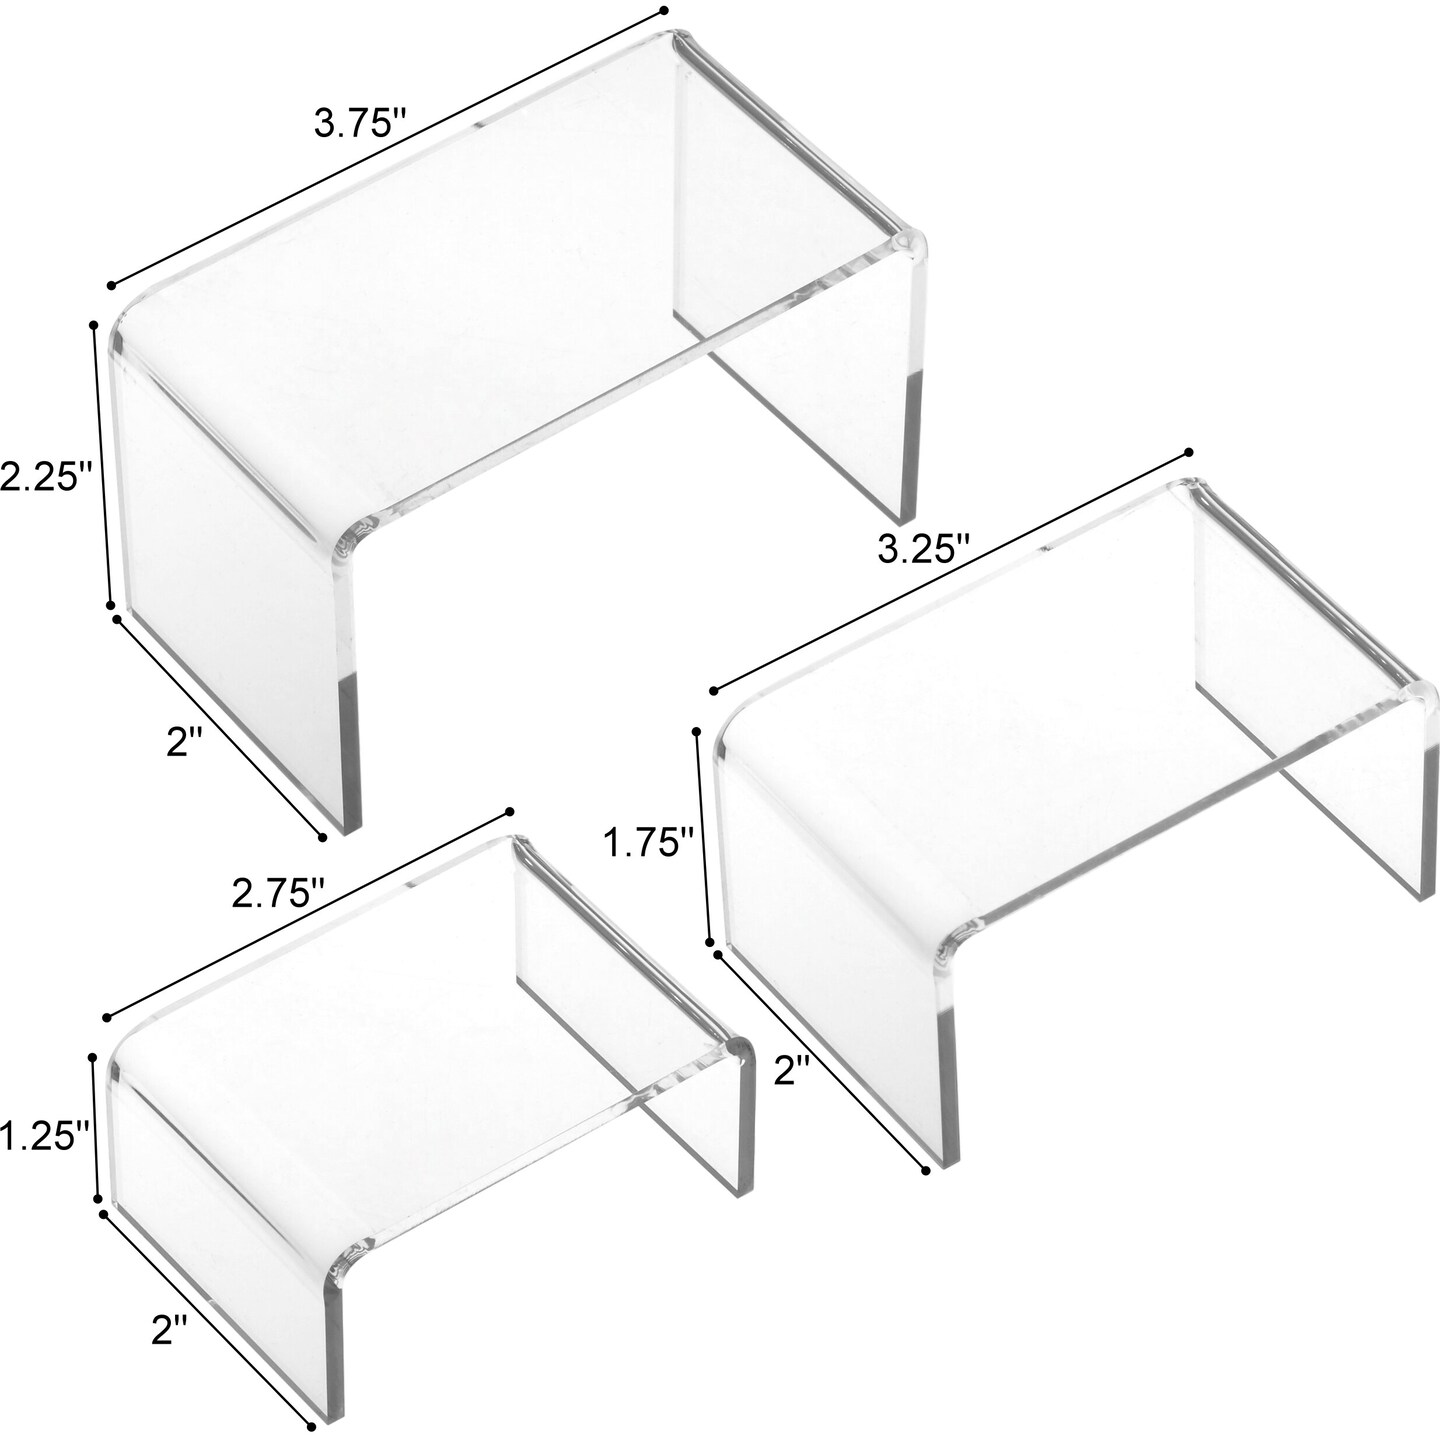 FindingKing 6 Clear Acrylic Jewelry Display Risers Showcase Fixtures